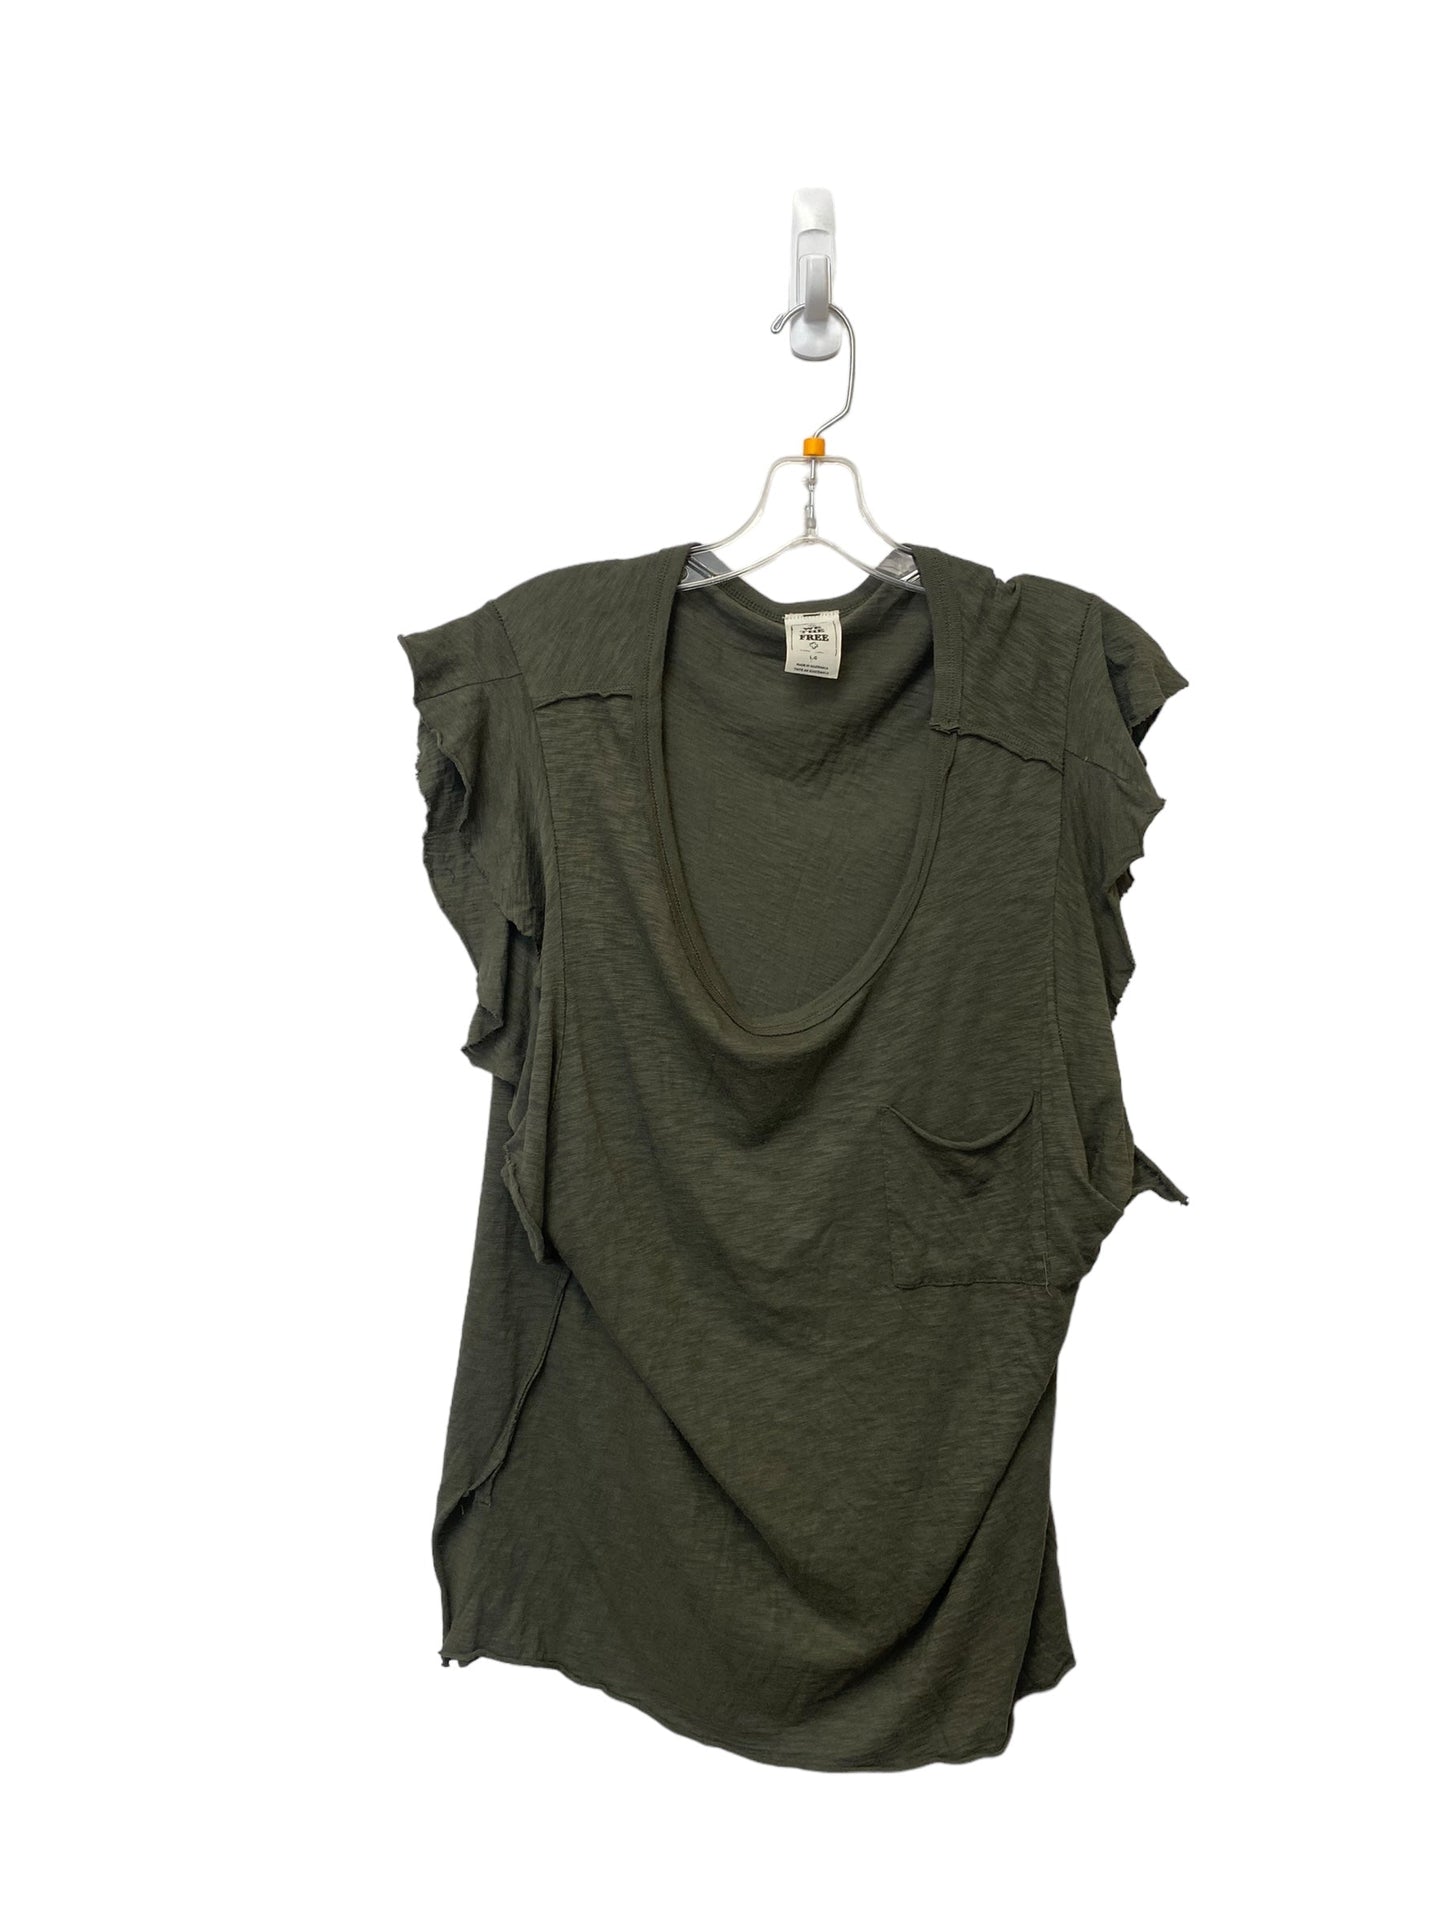 Green Top Short Sleeve We The Free, Size L